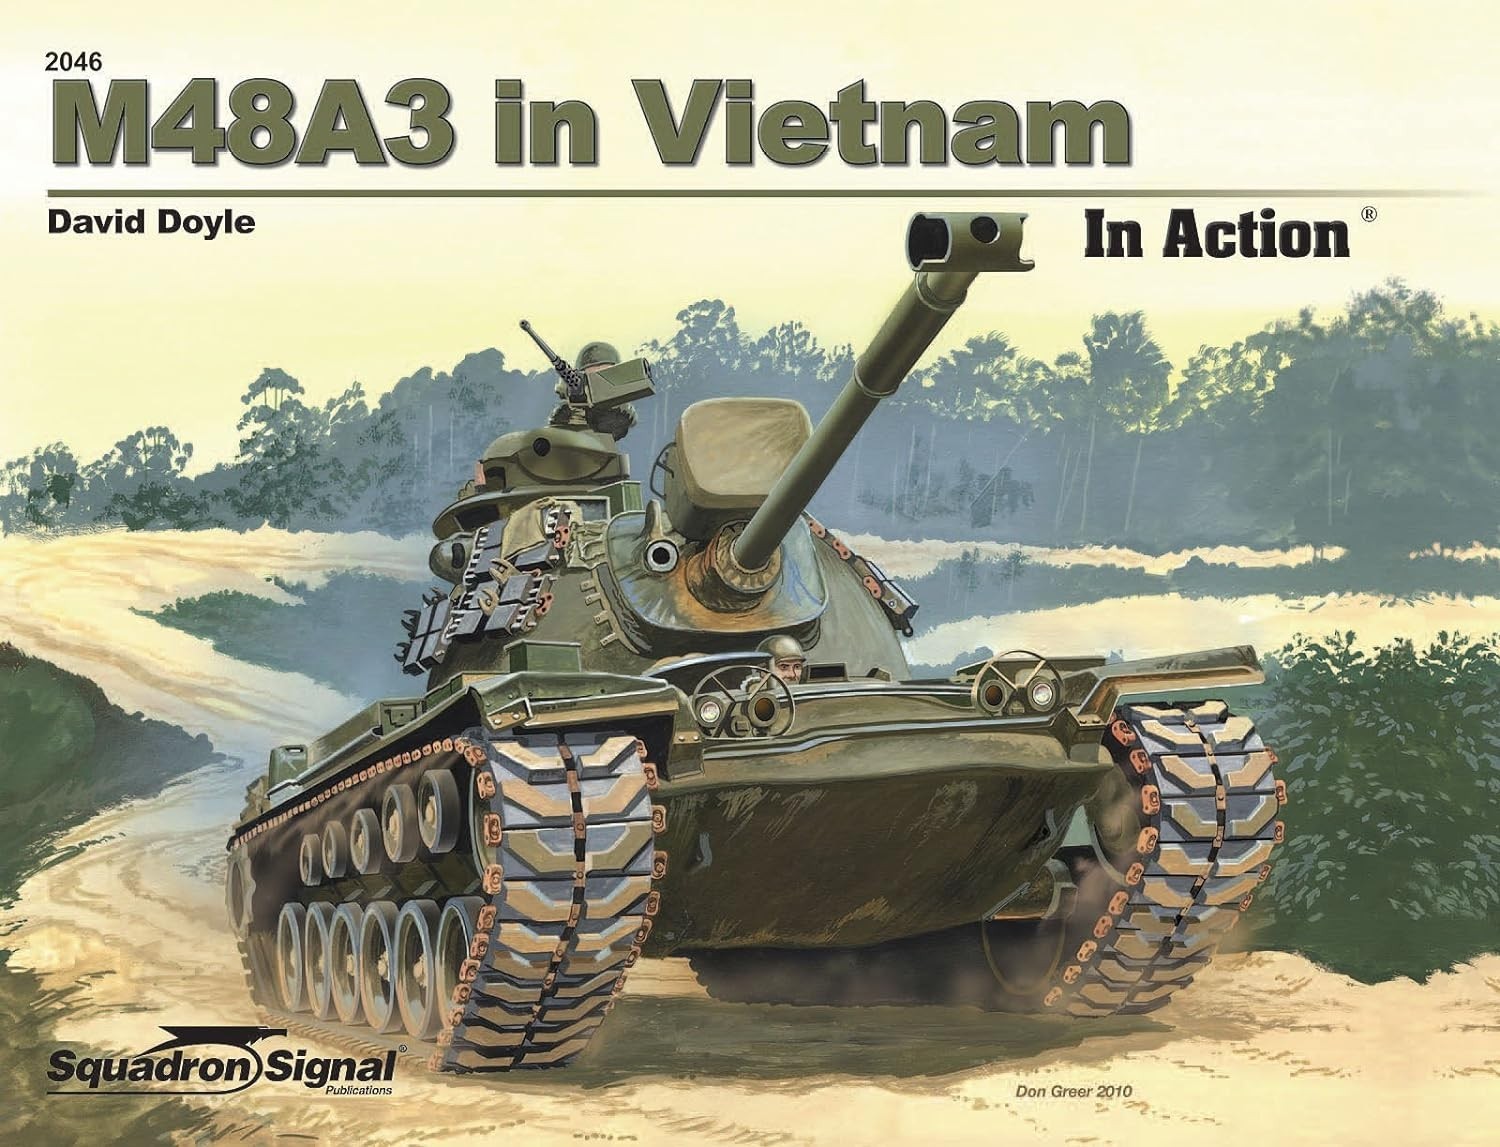 M48A3 in Vietnam in Action